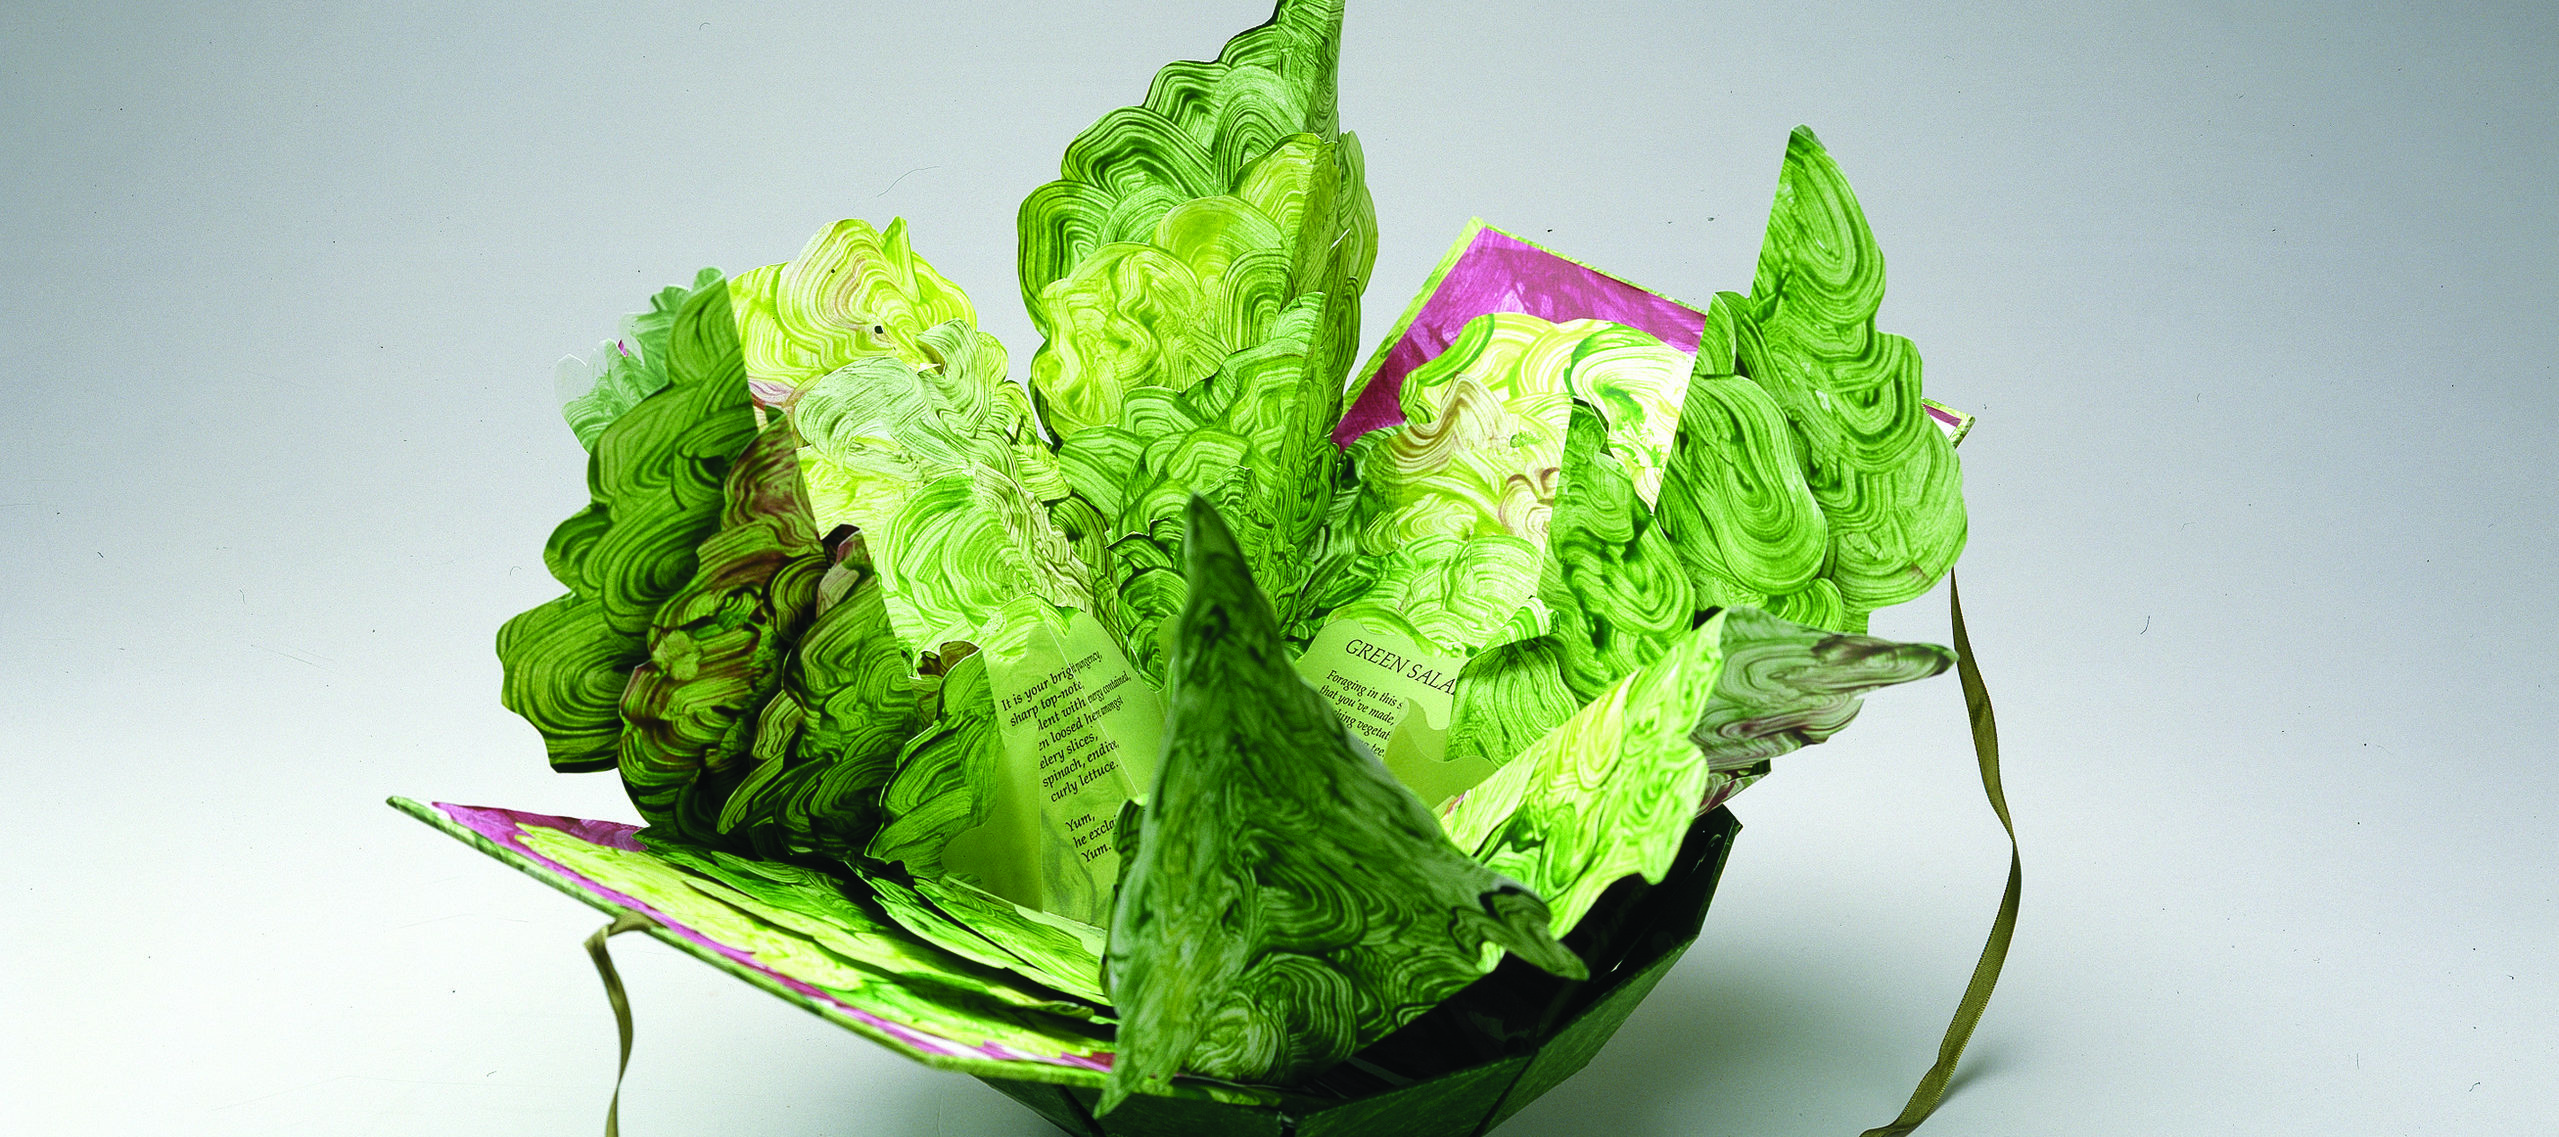 Artist's book resembling a salad in a bowl. Constructed of Tyvek that has been painted in swirling greens and map-folded to look like leaves of lettuce, there is poem written on the inner the leaves.